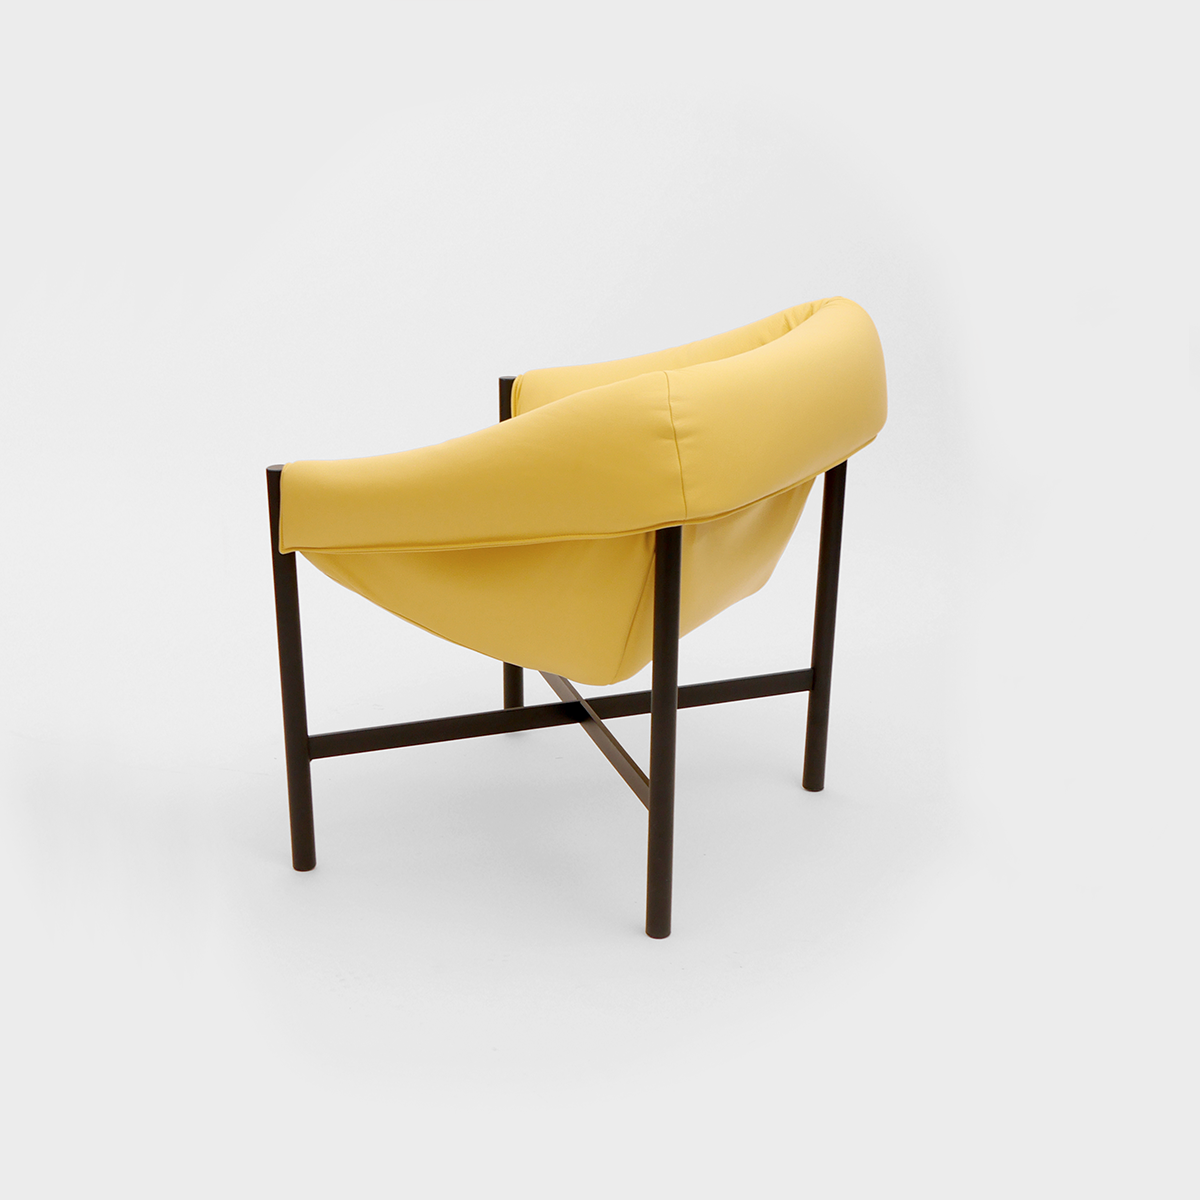 Falstaff armchair in yellow by Stefan Diez for DANTE - Goods and Bads